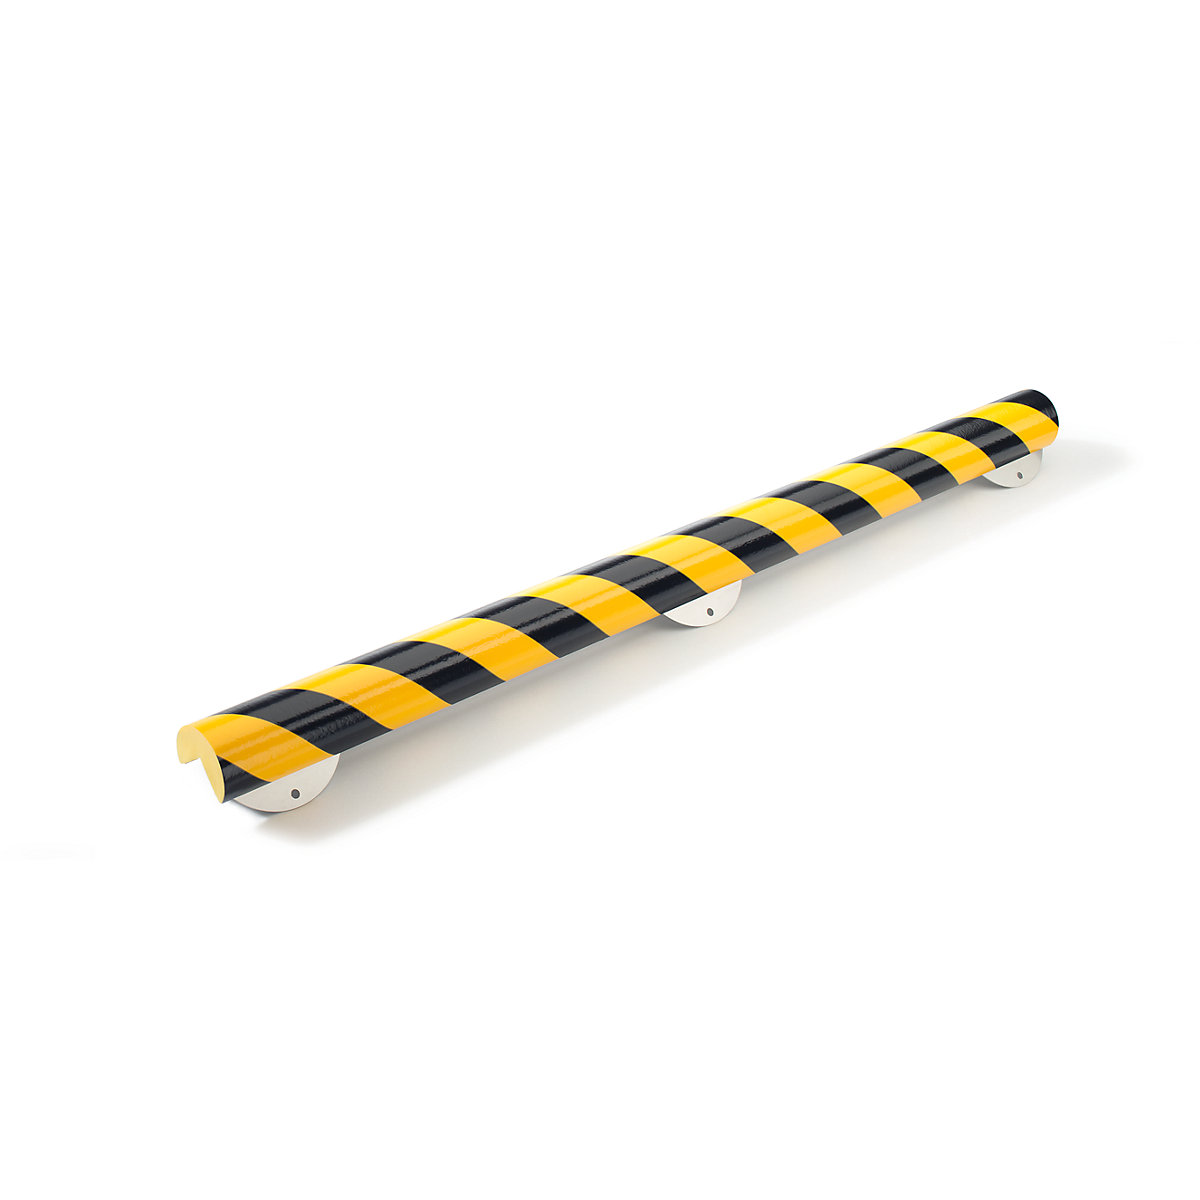 Knuffi® corner protection with mounting rail – SHG, type A+, 500 mm piece, black / yellow-10